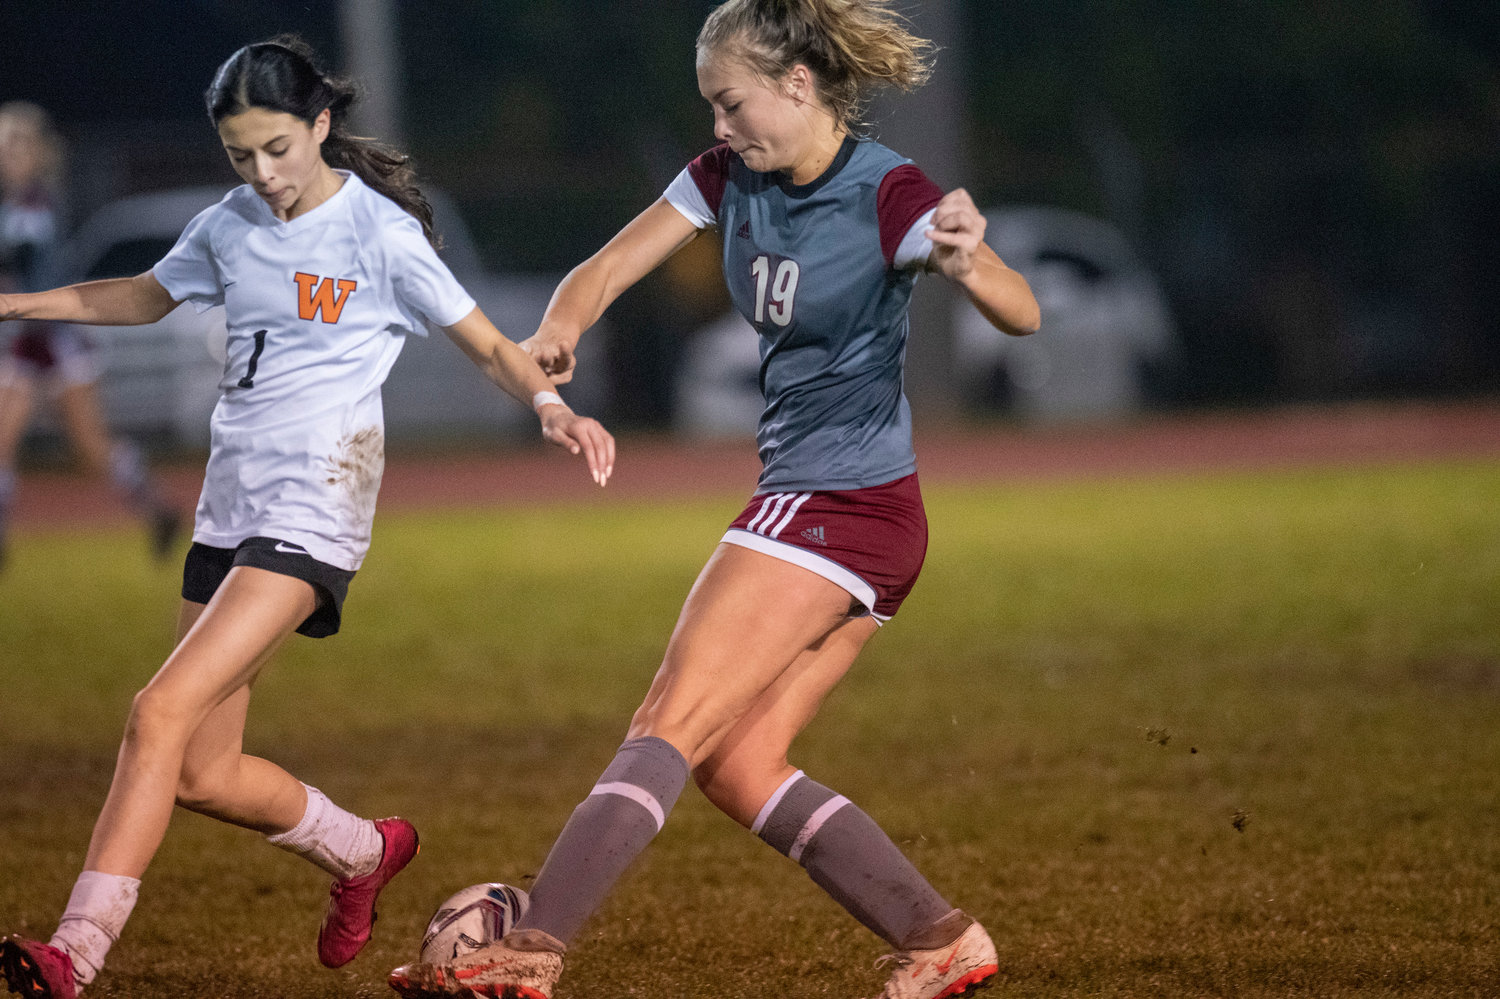 W.F. West's Kyla McCallum (19) fights for the ball against Washougal's Jamie Maas (1) during a district playoff match at home on Tuesday, Nov. 2.